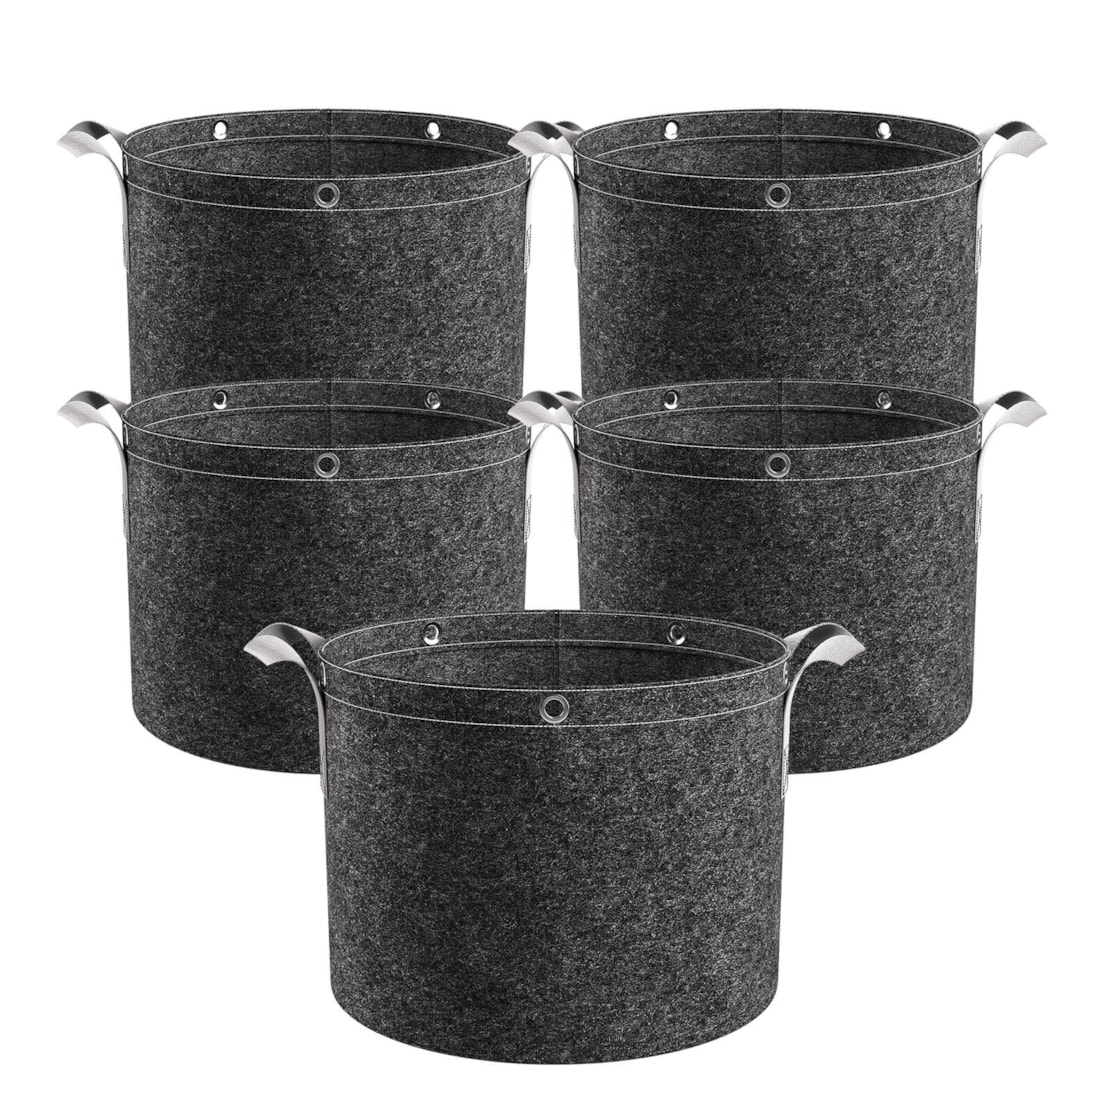 VIVOSUN 5 Gallon Grow Bags 5-Pack Black Thickened Nonwoven Fabric Pots with Handles, Multi-Purpose Rings